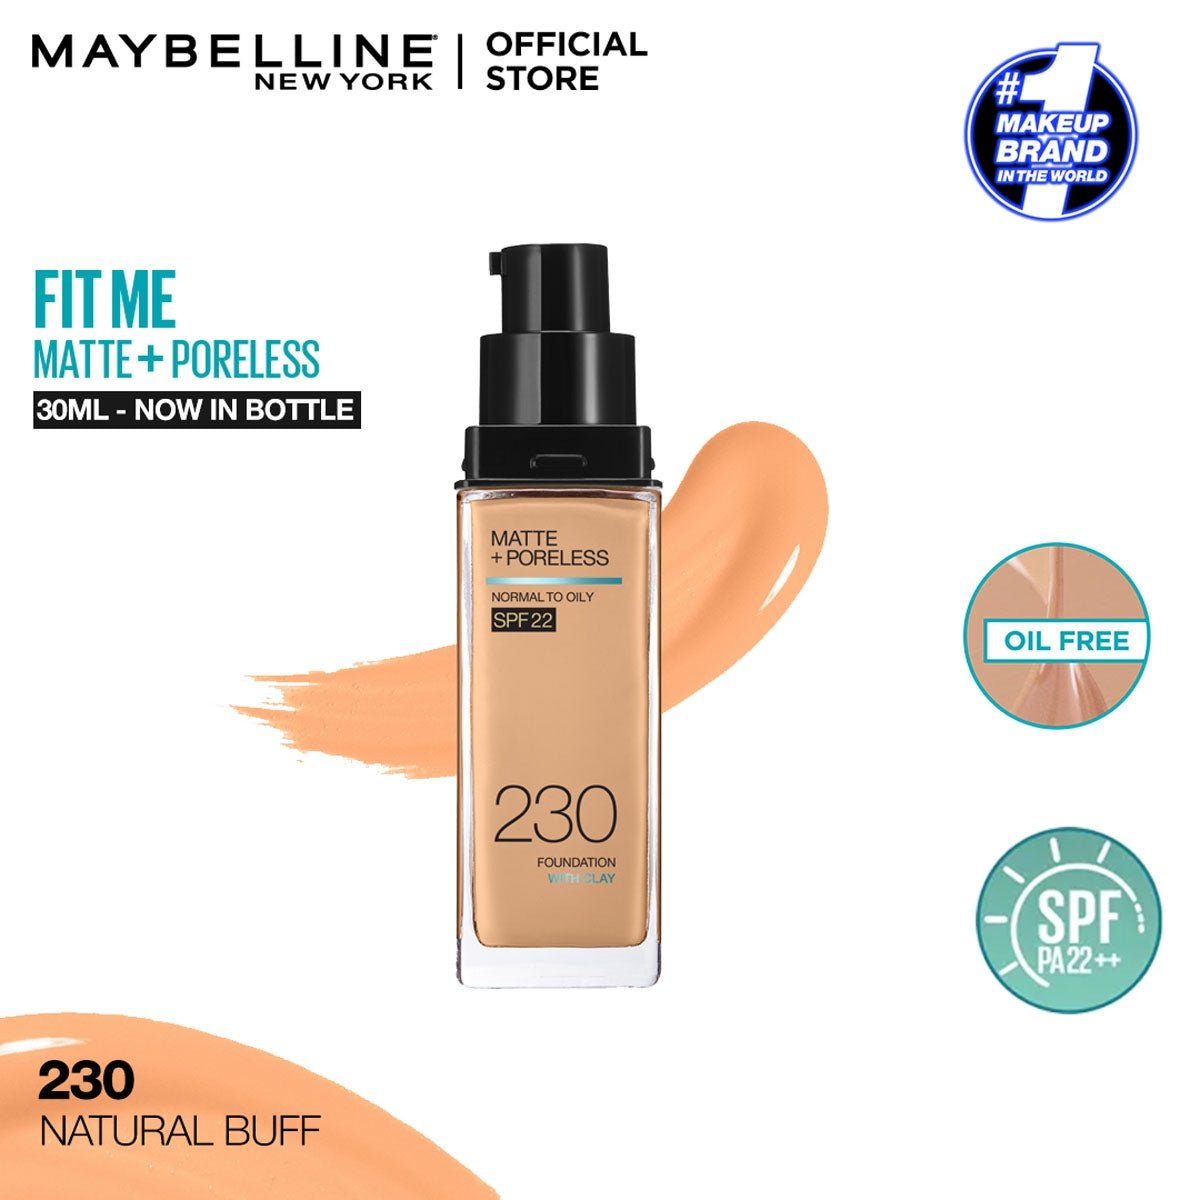 Maybelline Fit Me Foundation Matte and Poreless 230 Natural Buff. - AllurebeautypkMaybelline Fit Me Foundation Matte and Poreless 230 Natural Buff.